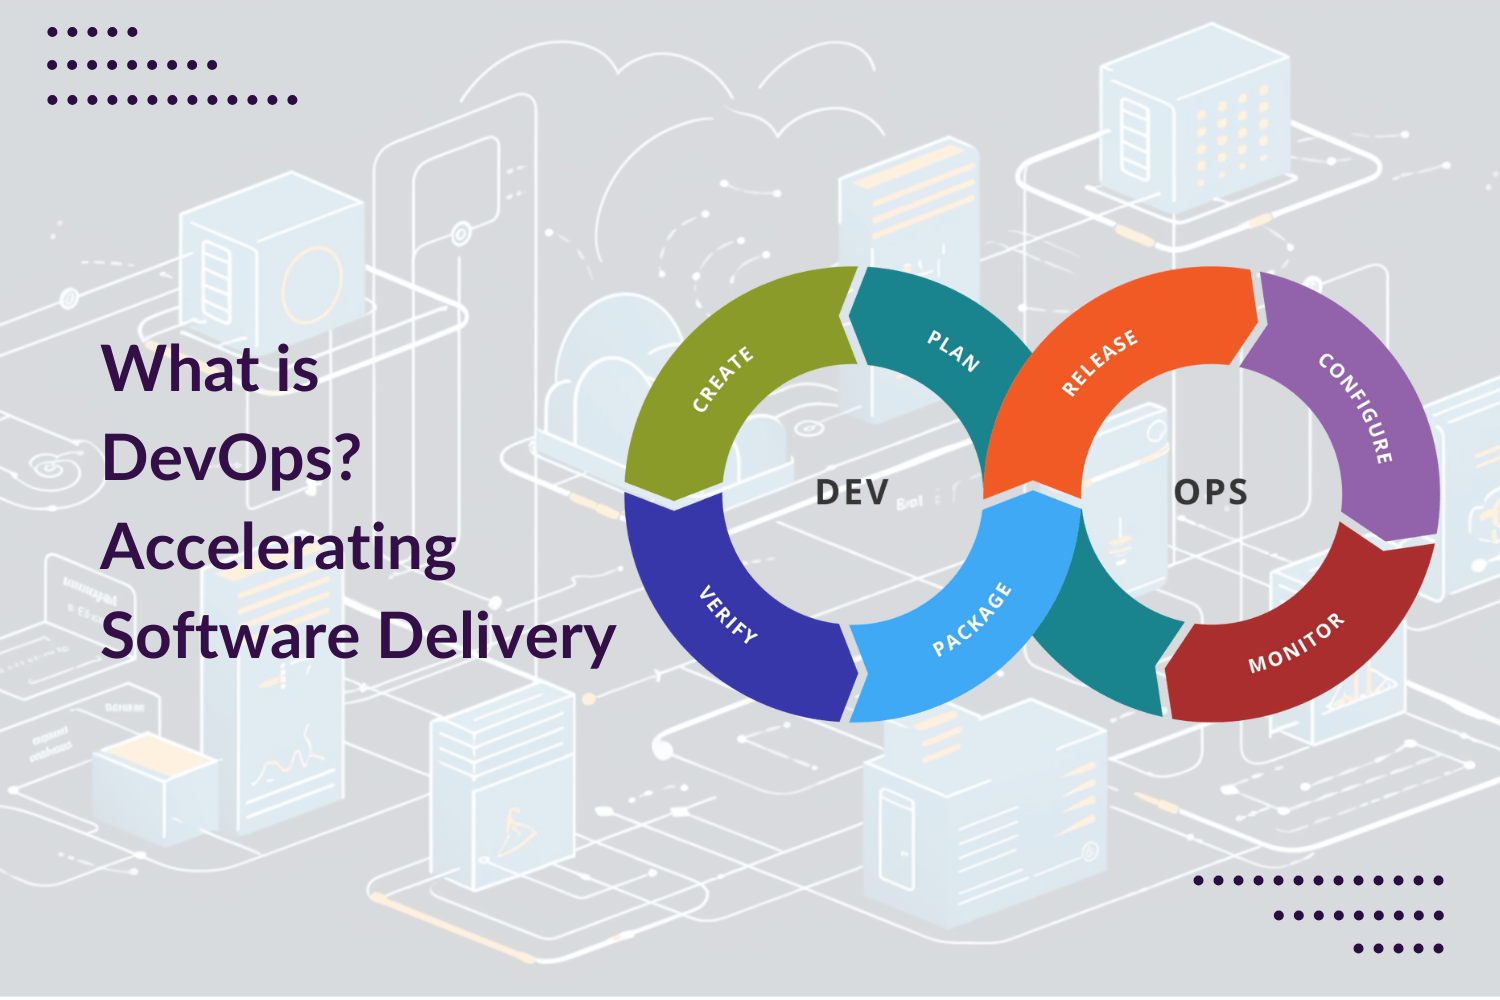 What is DevOps? Accelerating Software Delivery